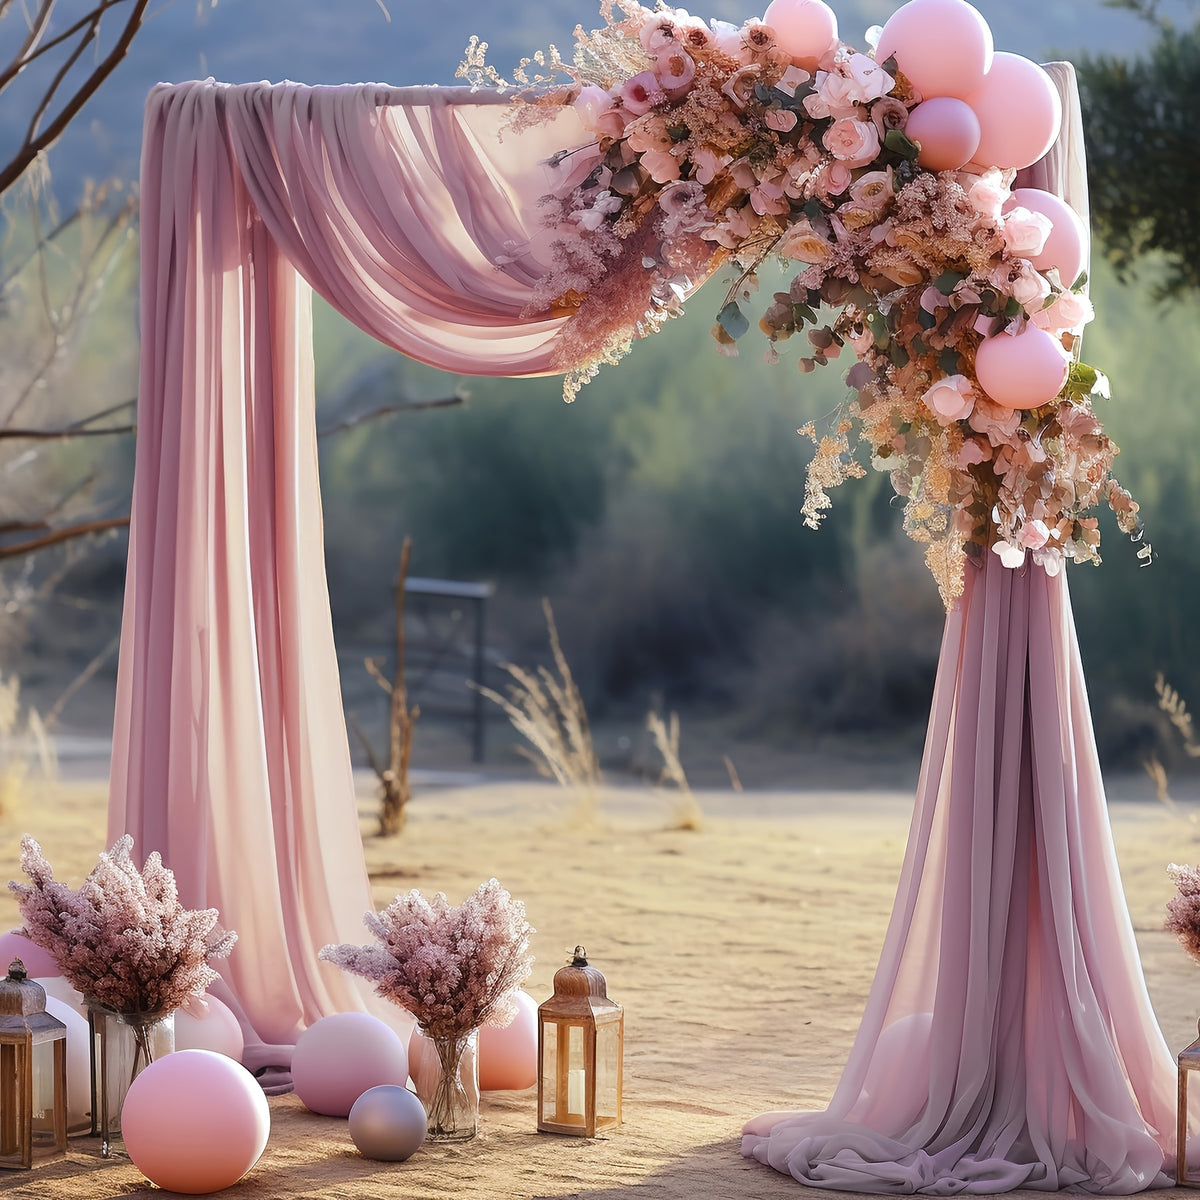 a wedding arch decorated with pink flowers and balloons